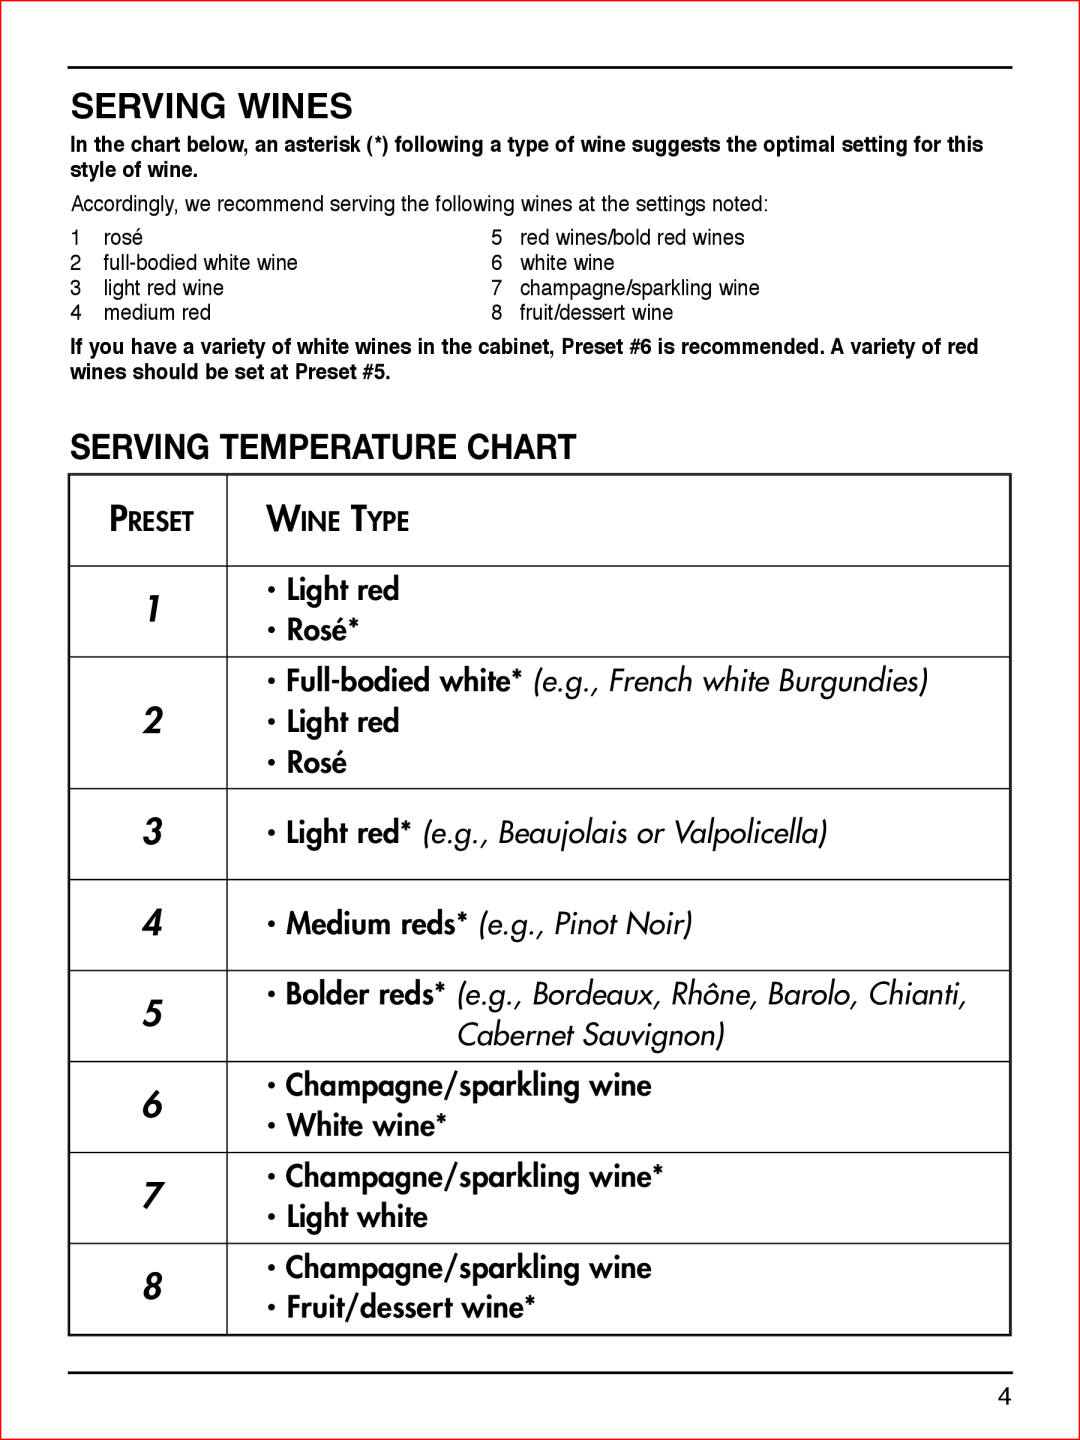 Cuisinart CWC-900C manual Serving Wines, Serving Temperature Chart, Full-bodied white* e.g., French white Burgundies 